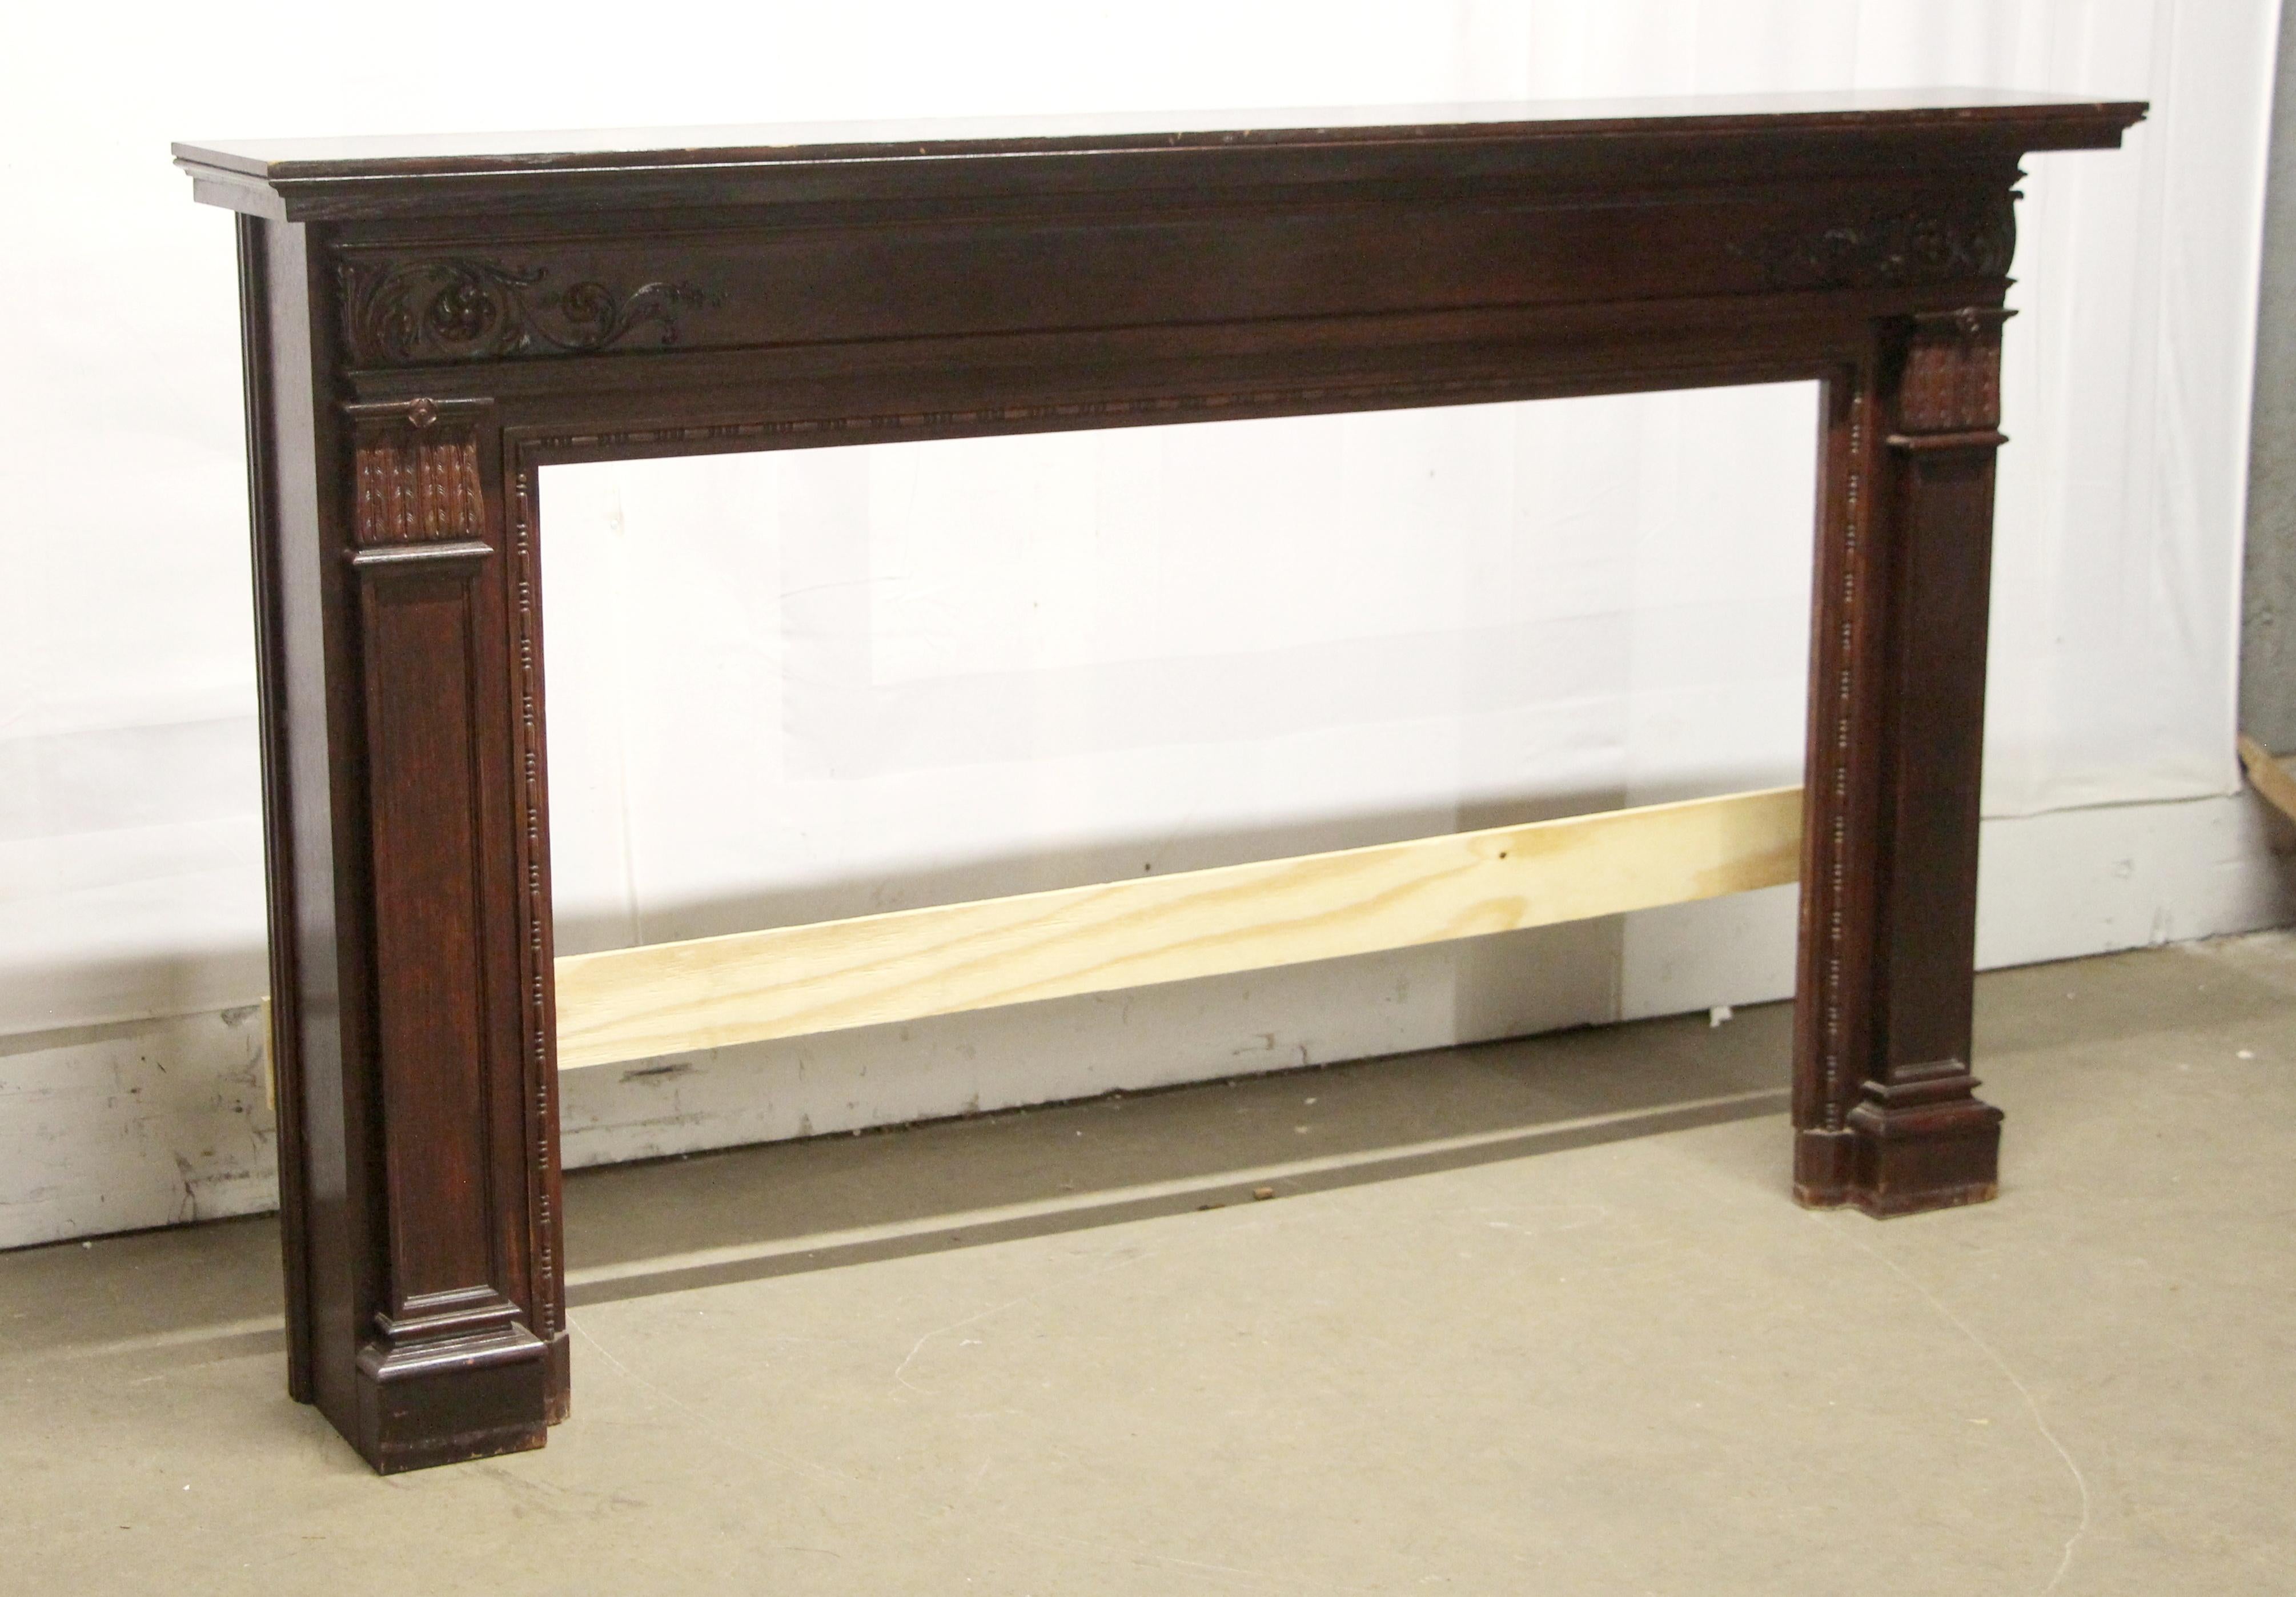 Large wooden Federal style mantel with a dark mahogany finish and decorative carvings. There is general wear from age and use. This can be seen at our 302 Bowery location in NoHo in Manhattan.